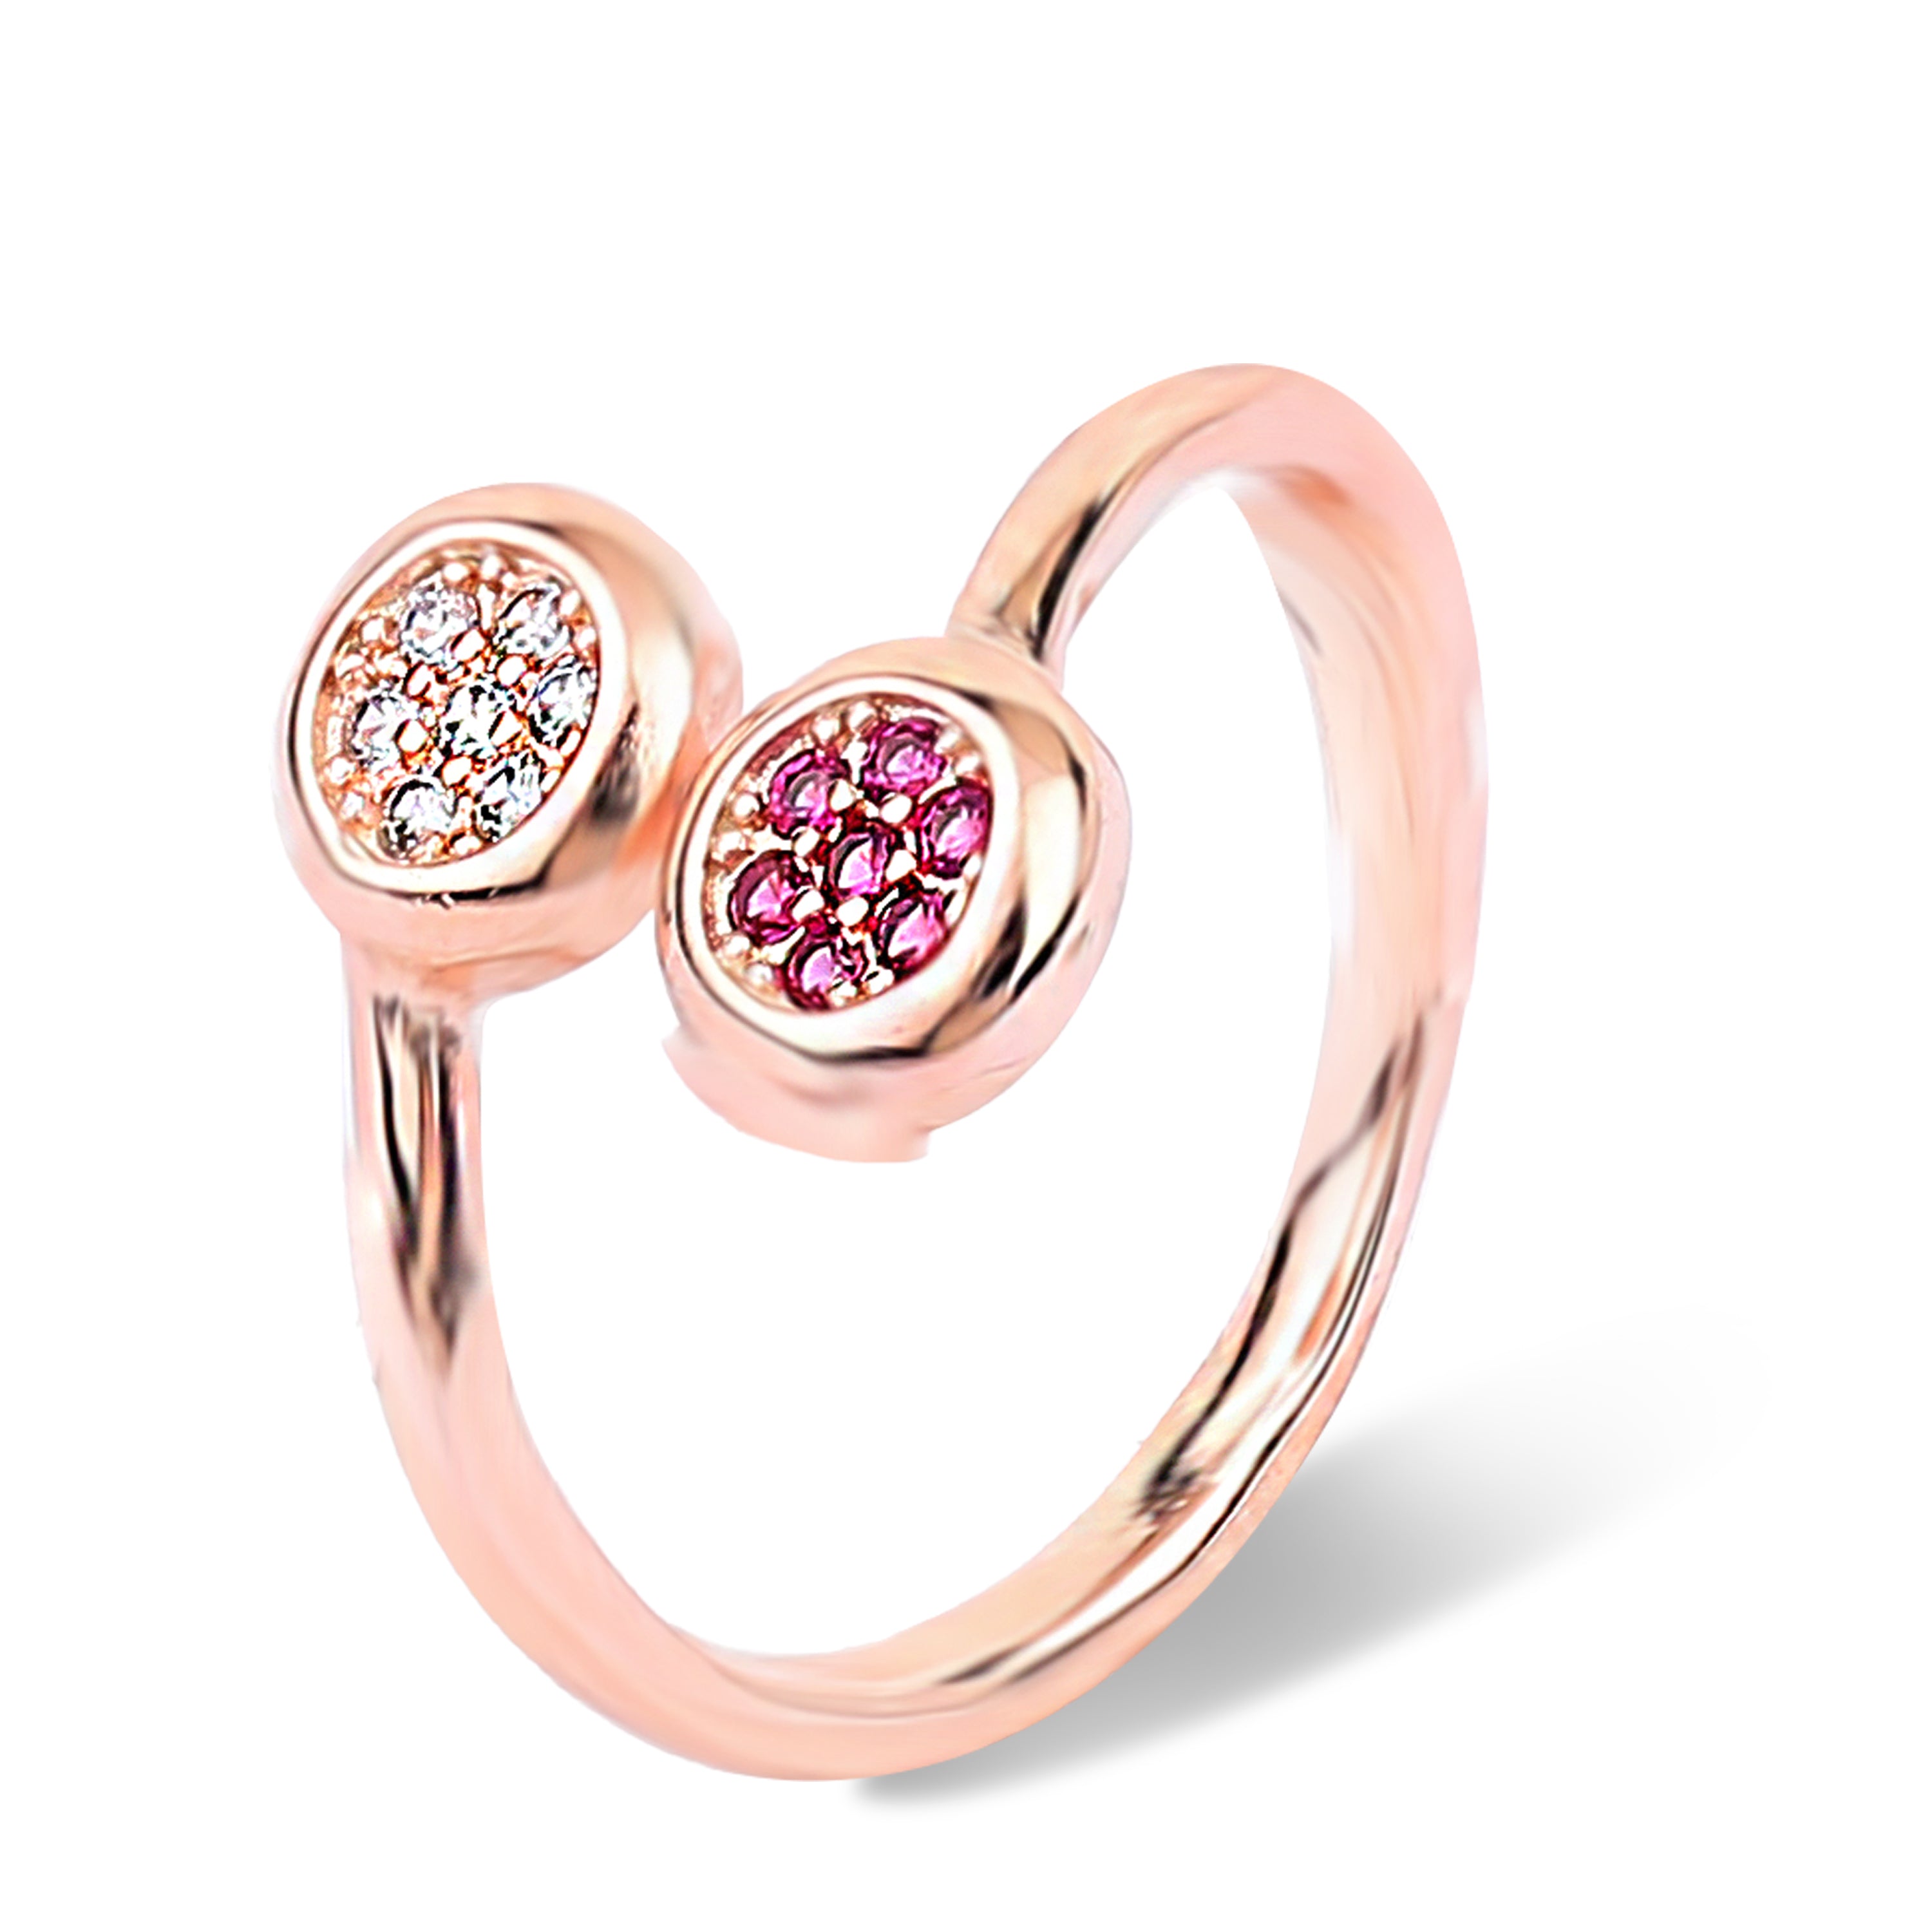 Rose gold double round ring with adjustable size